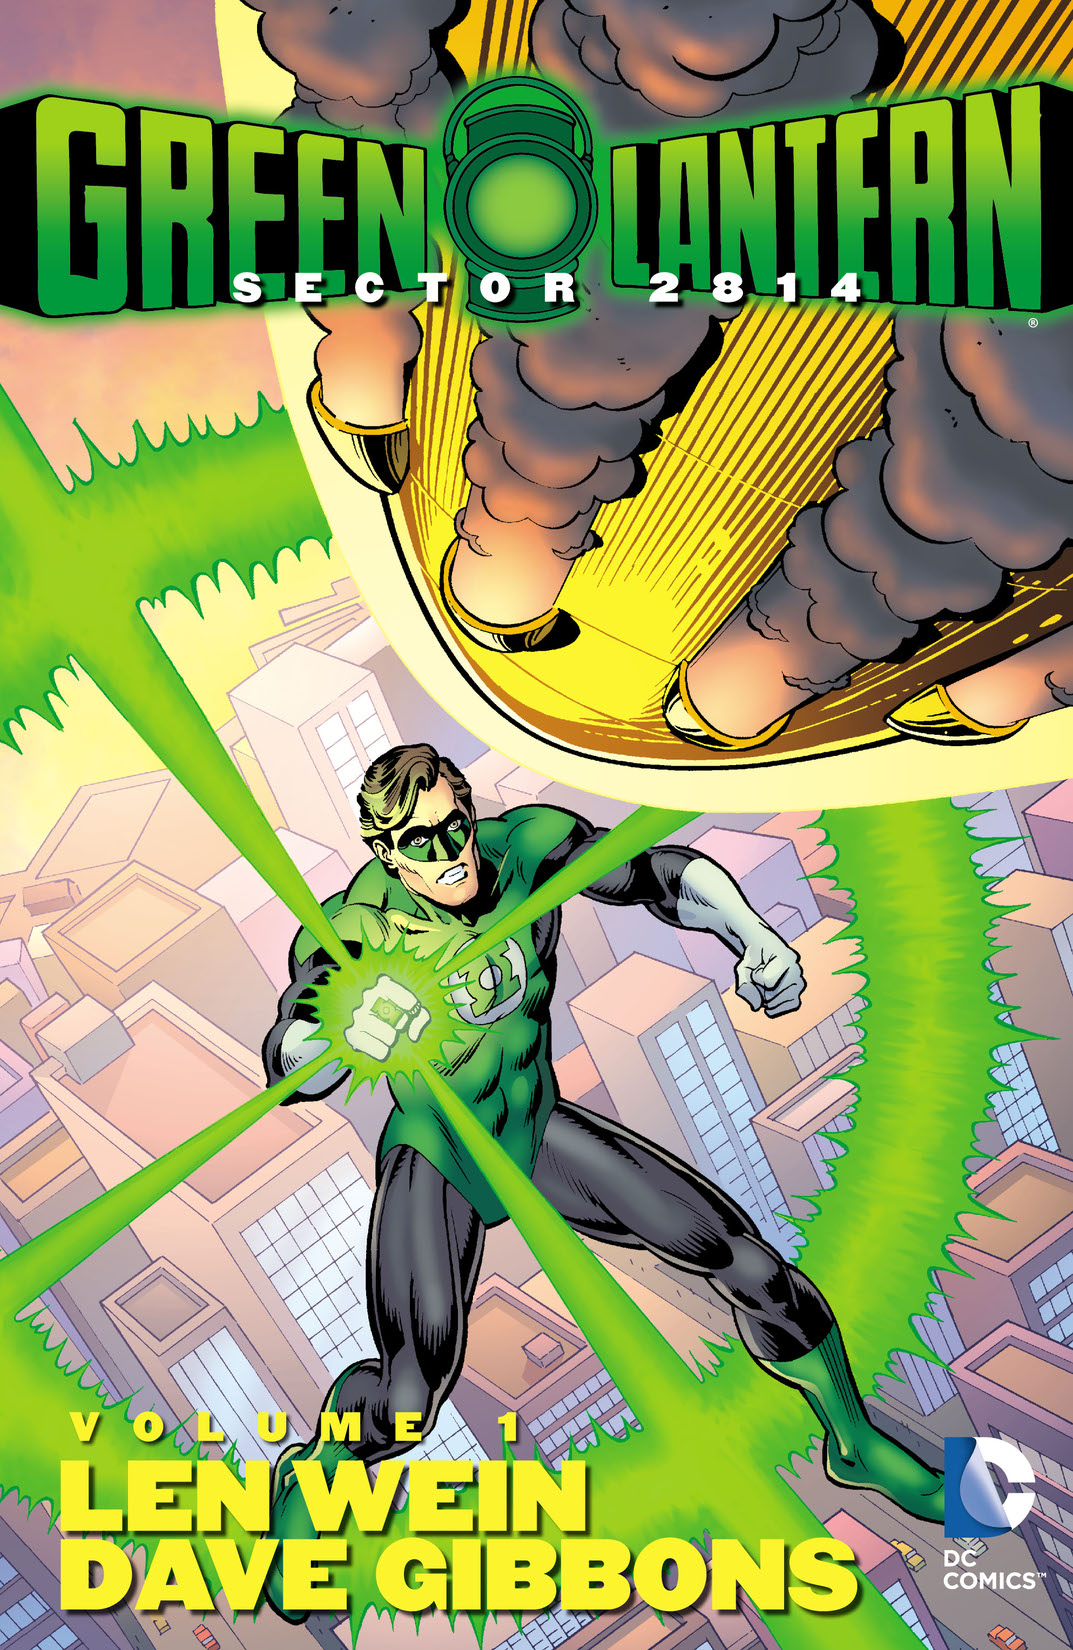 Green Lantern: Sector 2814 Vol. 1 preview images